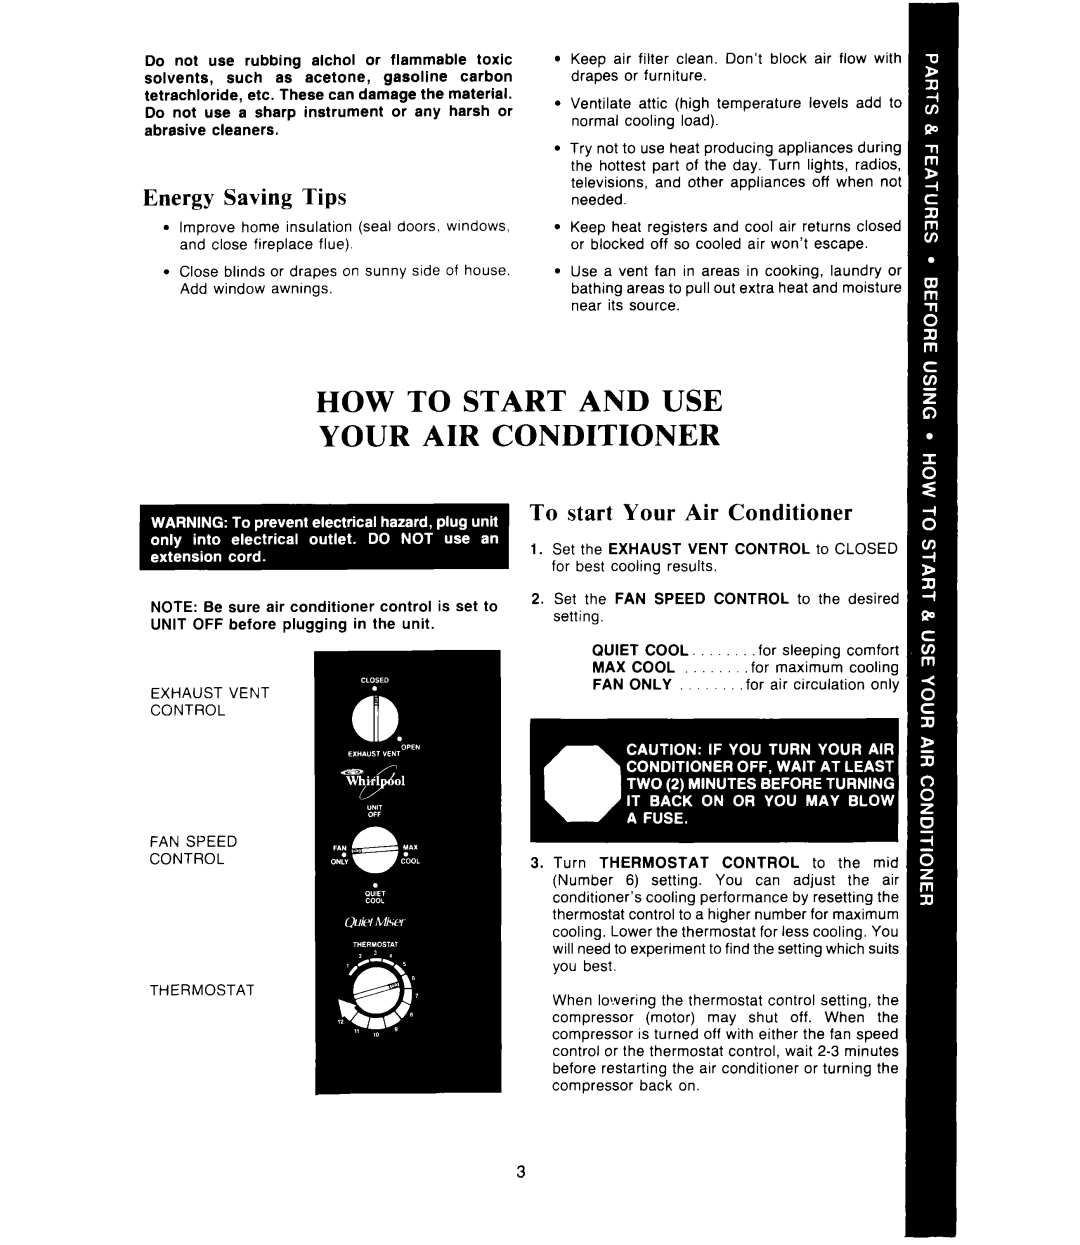 Whirlpool ACW082, ACPS82 HOW TO STA .RT AND USE YOUR AIR CdBNDITIONER, Energy Saving Tips, To start Your Air Conditioner 